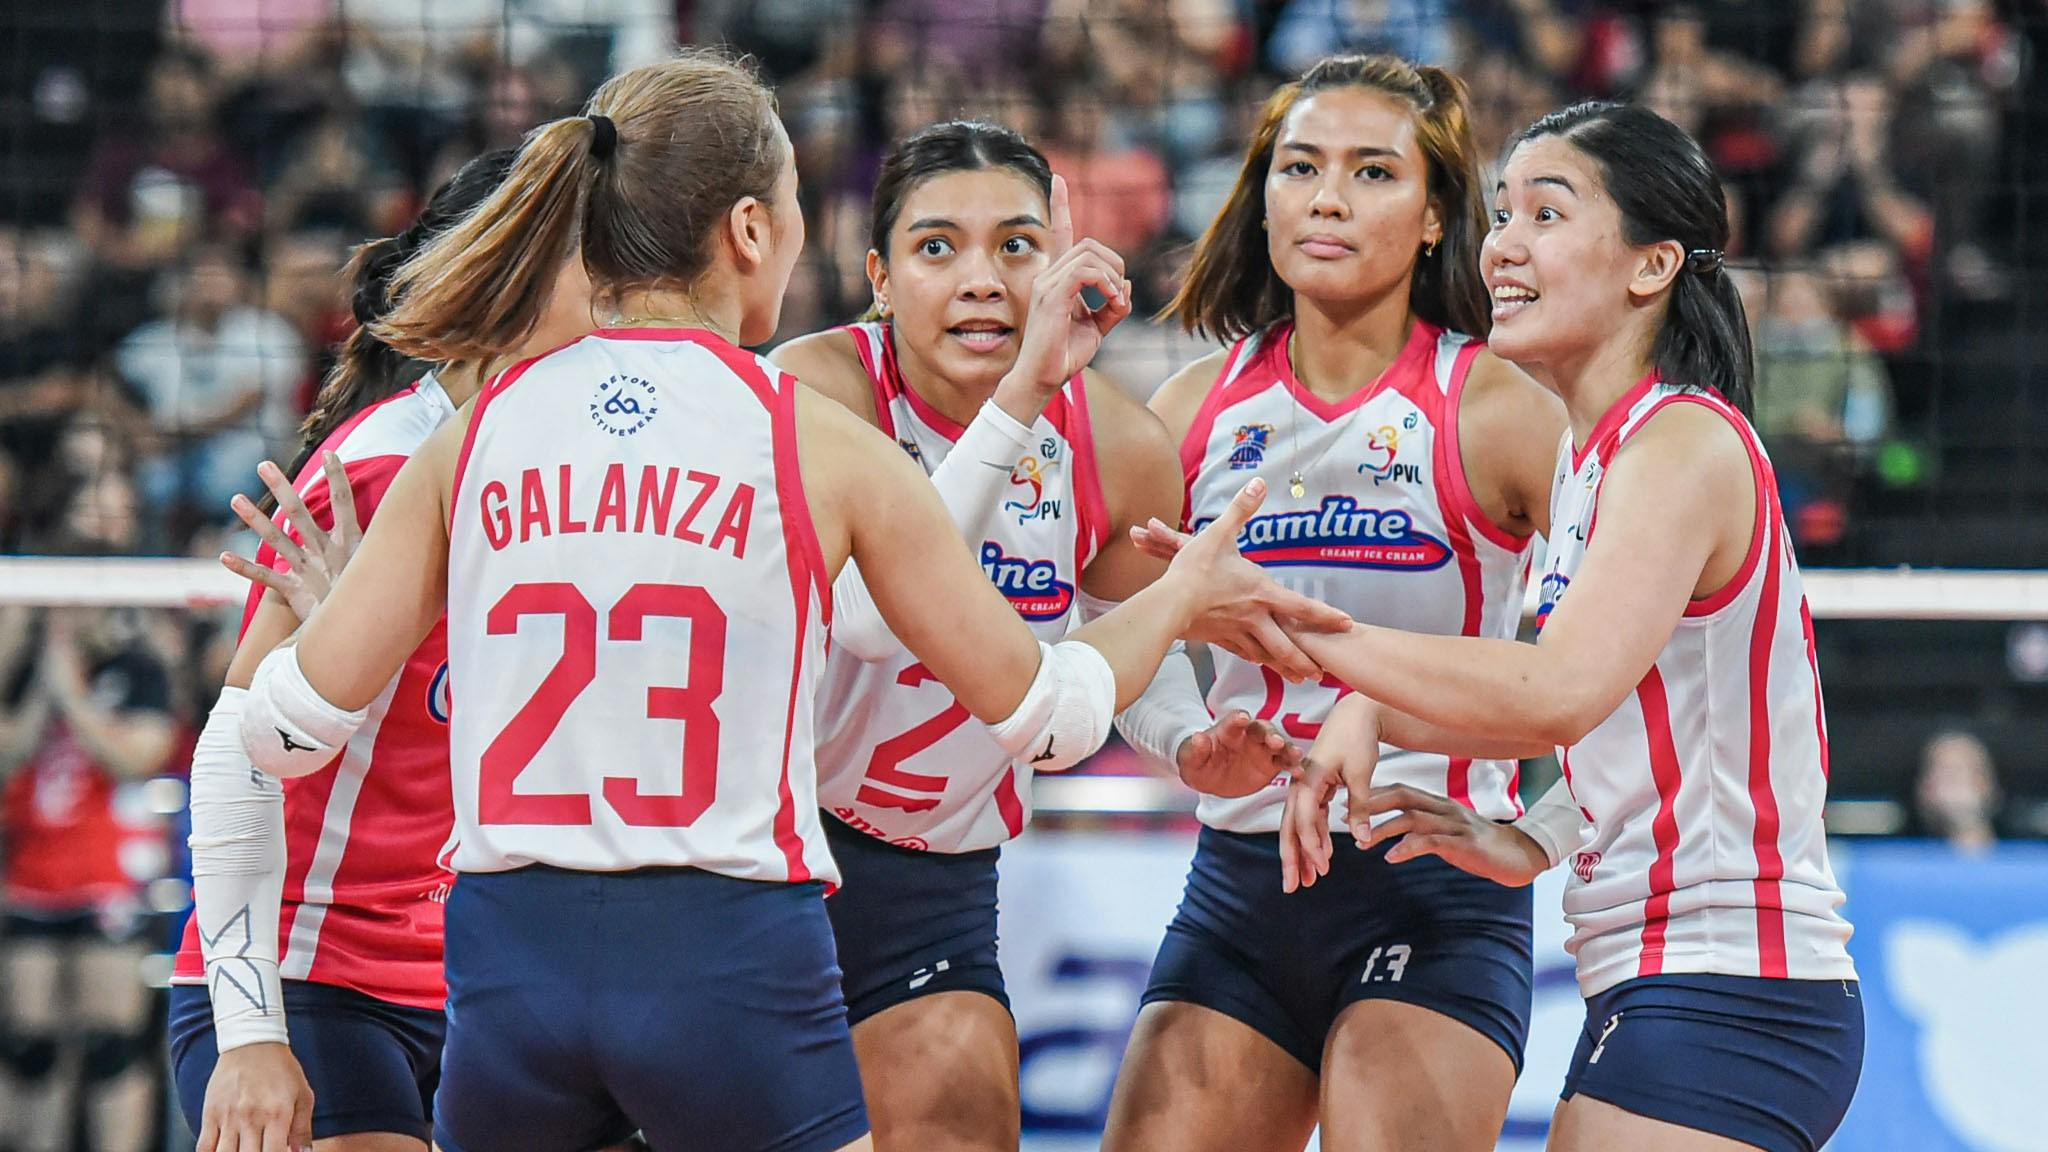 Walang inggitan: Creamline’s strong bond only adds to might in PVL Invitational 